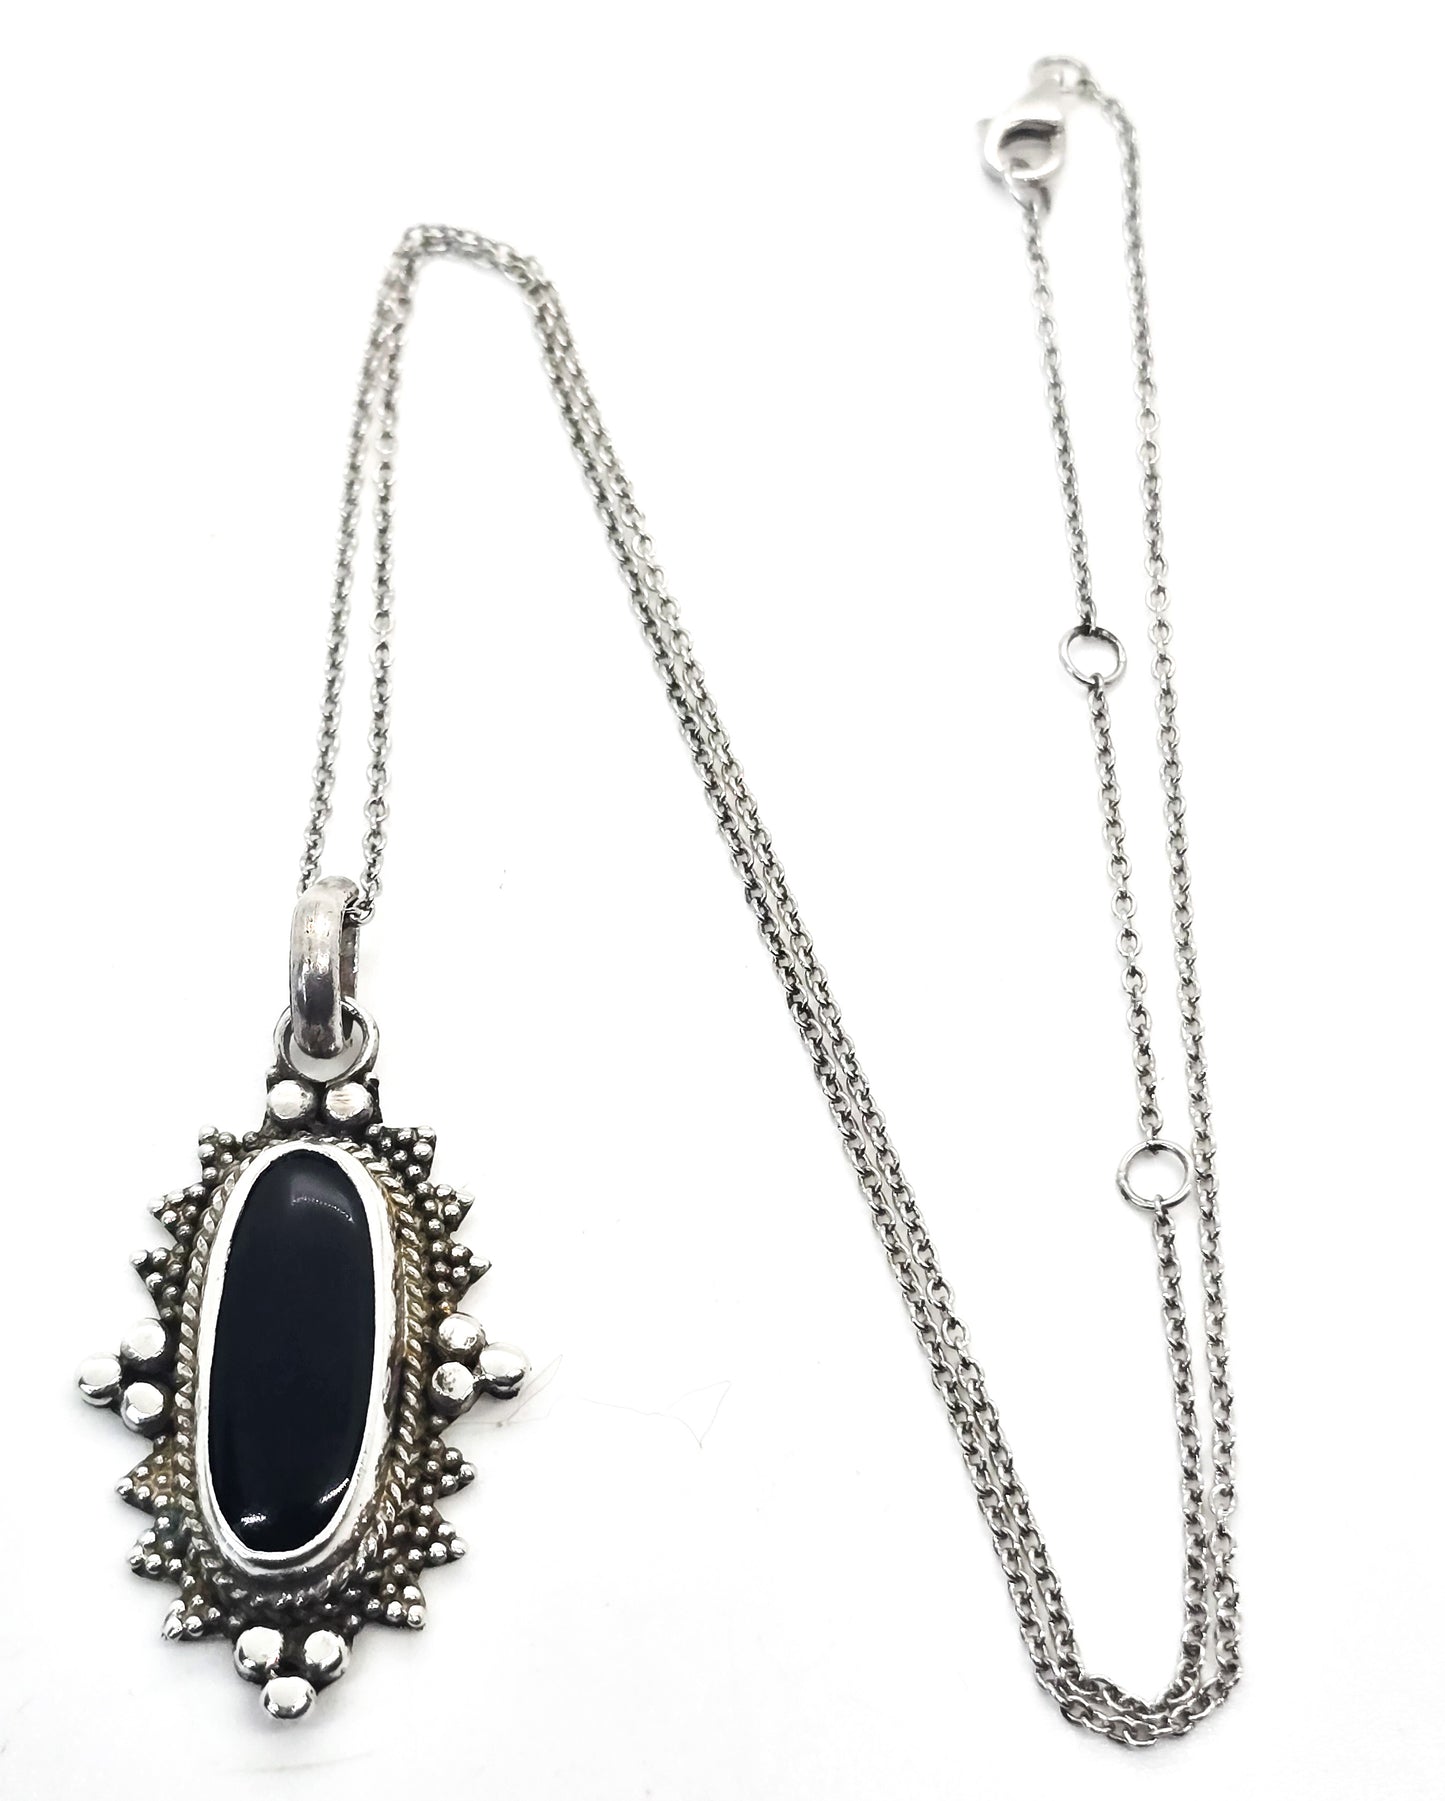 Black onyx vintage sterling silver bali decorated pendant necklace